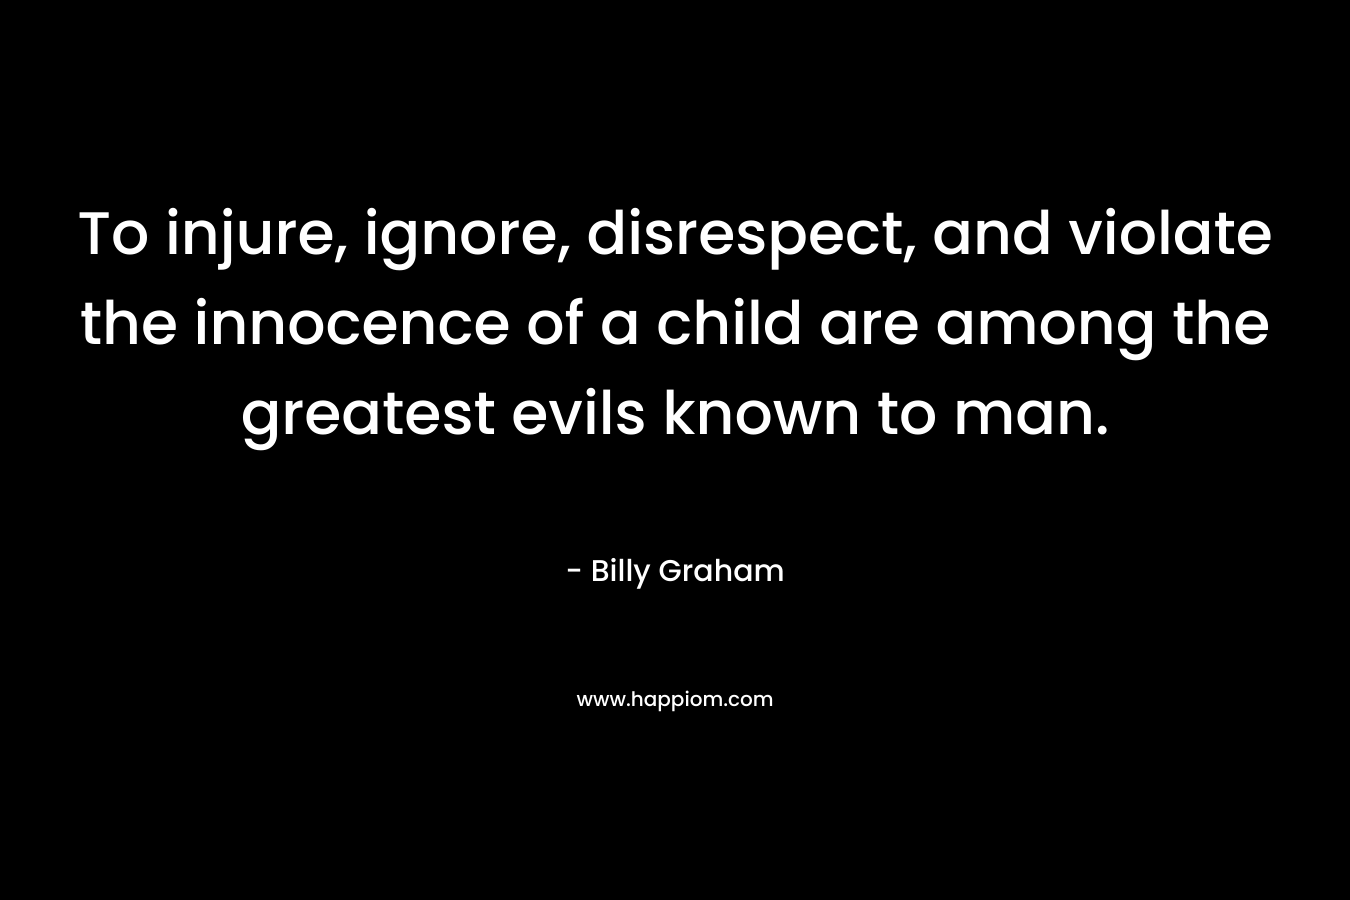 To injure, ignore, disrespect, and violate the innocence of a child are among the greatest evils known to man.